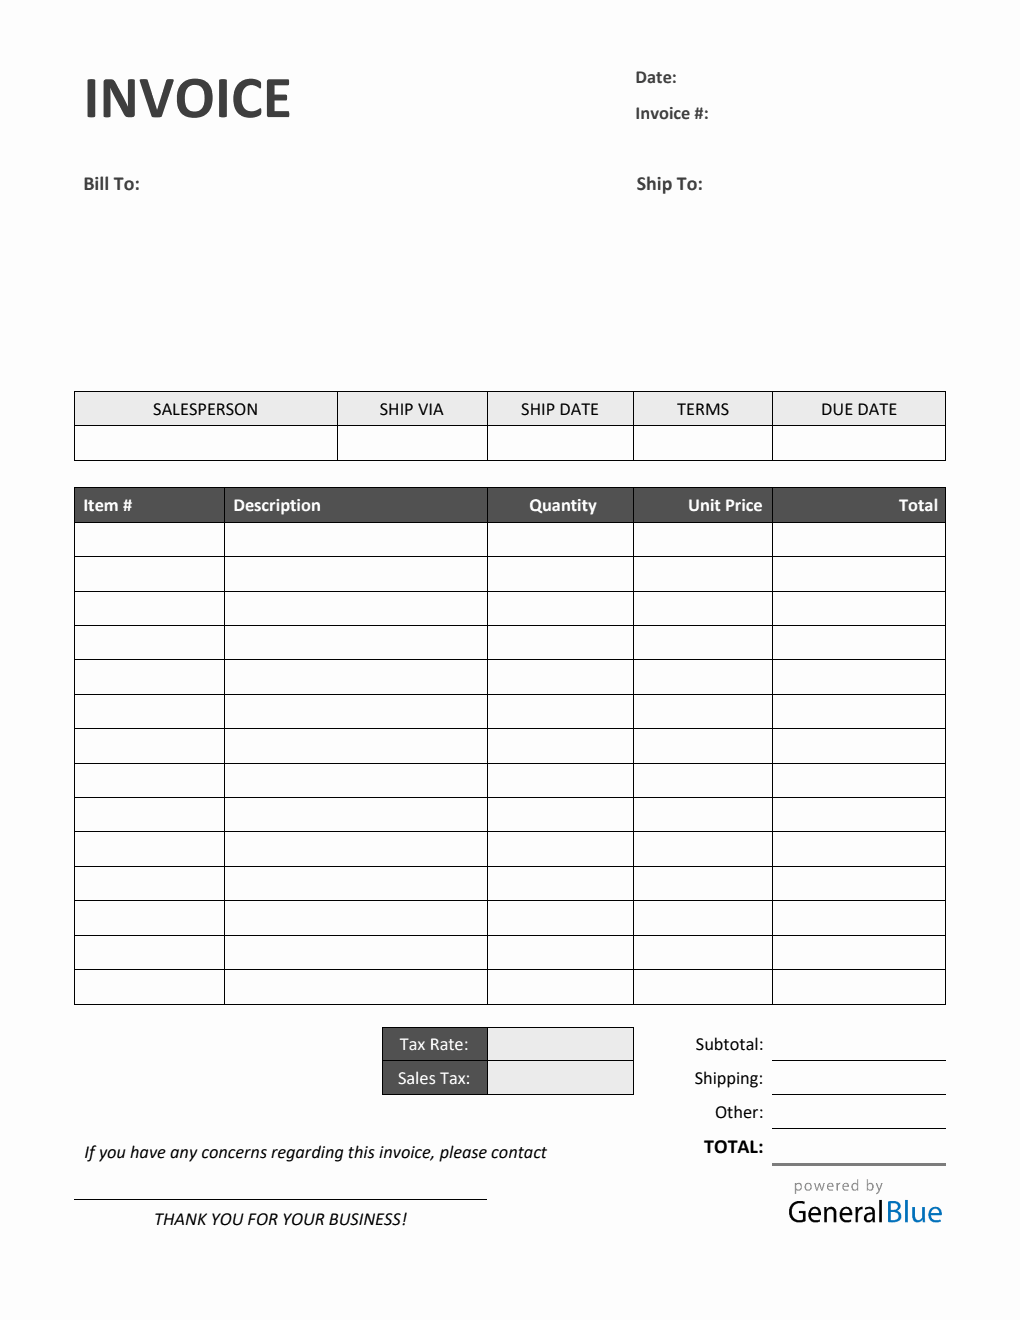 Sales Invoice with Tax in PDF (Colorful)